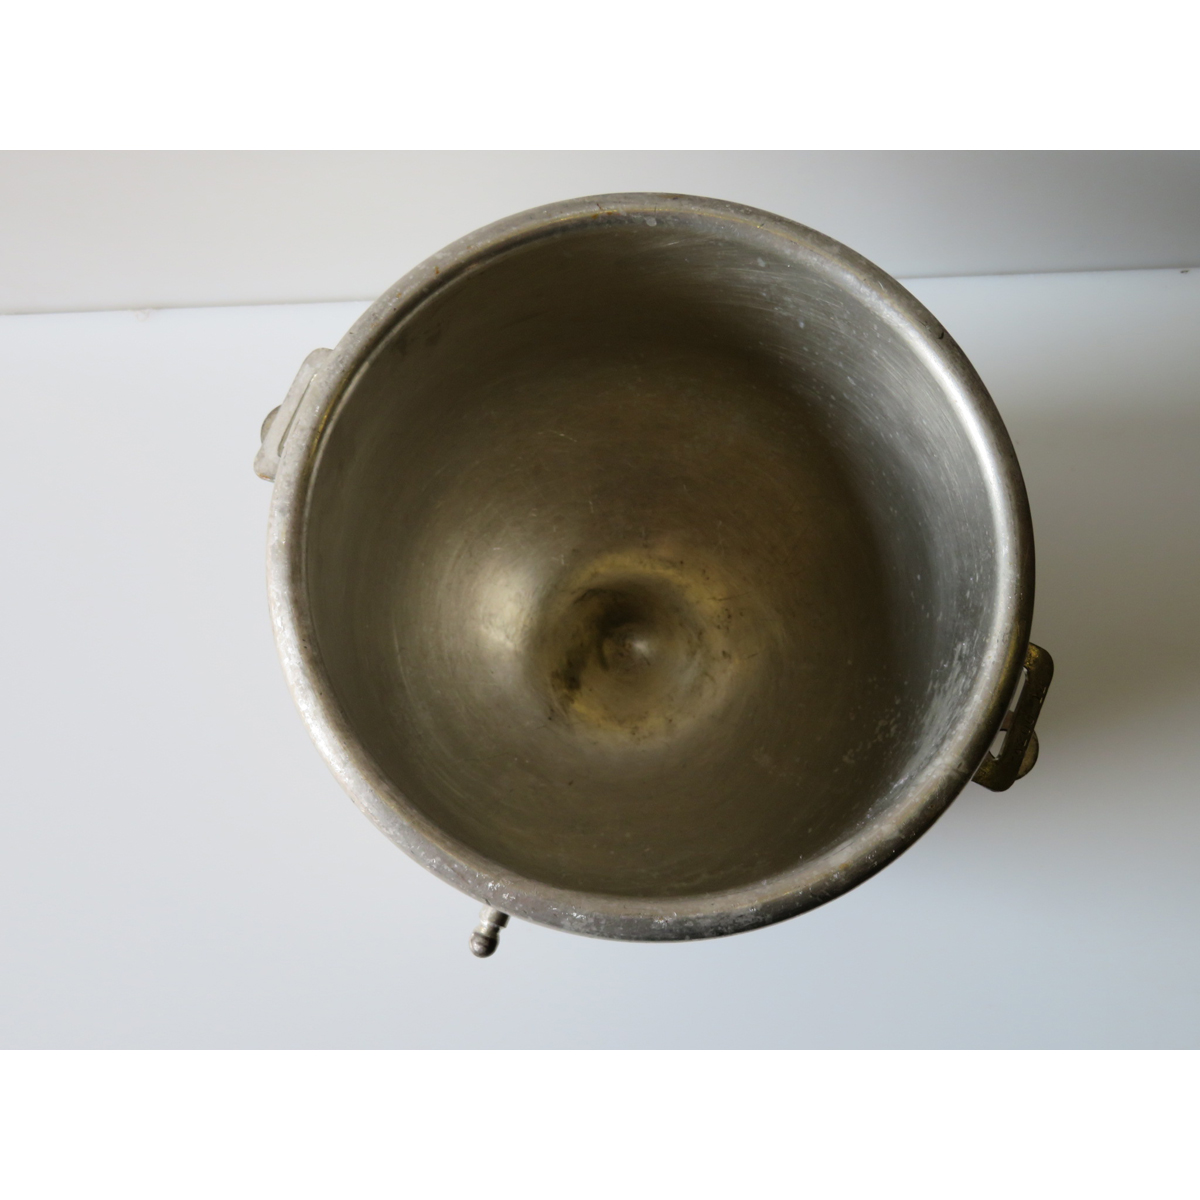 Hobart 00-295644 12-20 Quart Bowl to Fit A200 Mixer, Used Great Condition image 1